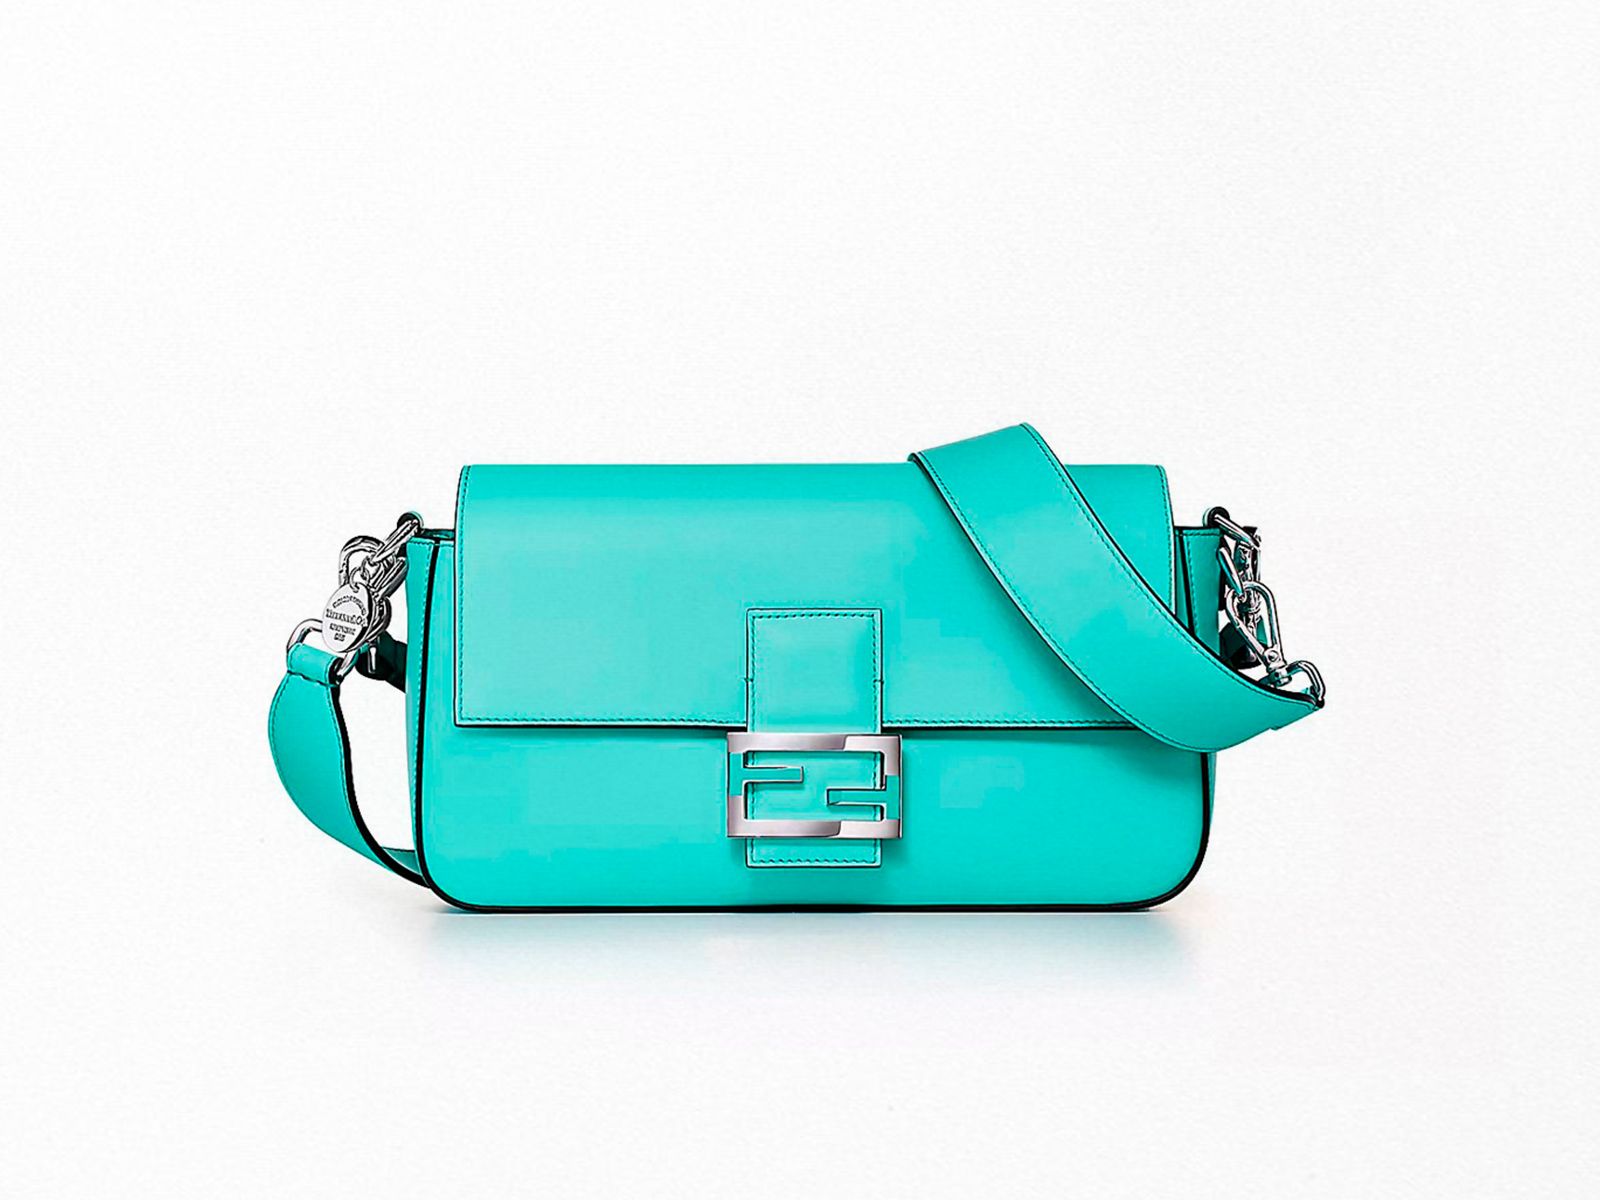 The limited edition ‘Tiffany Blue’ designed by Fendi and Tiffany & Co. is now on sale